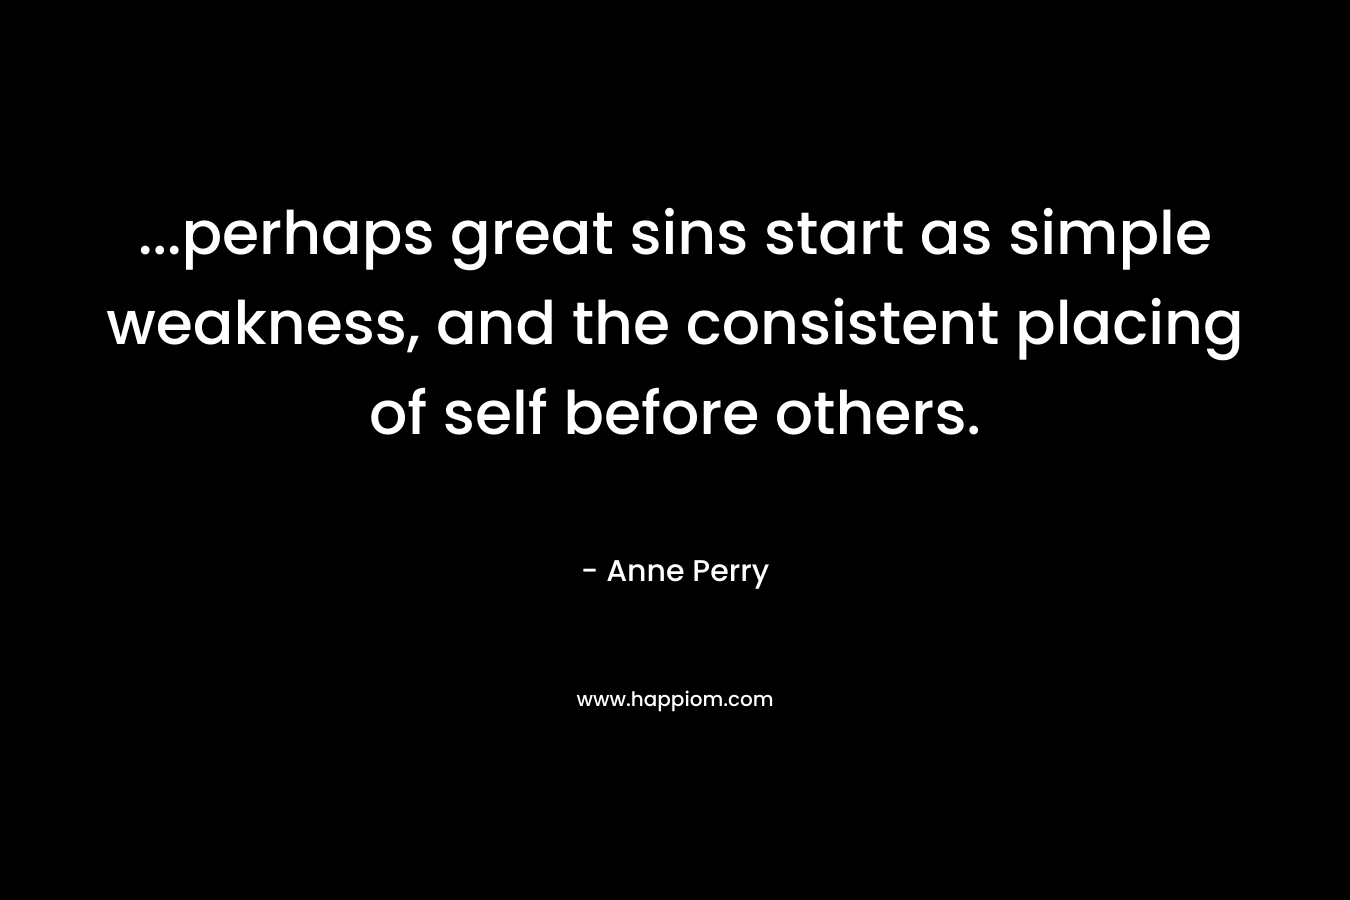 …perhaps great sins start as simple weakness, and the consistent placing of self before others. – Anne Perry